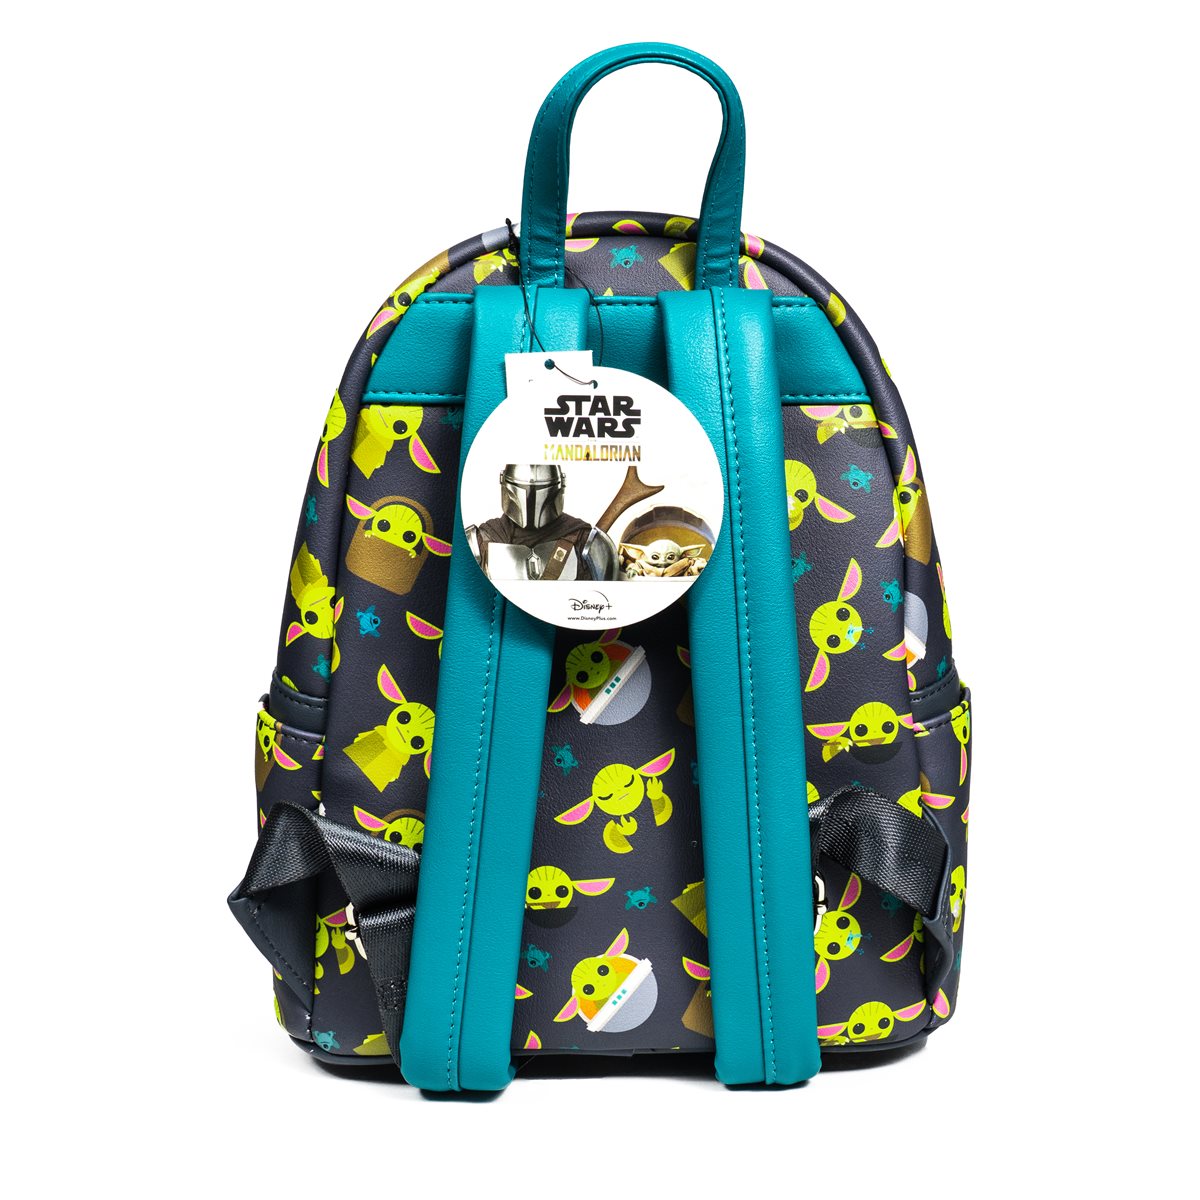 Children's Backpacks Just $9.99 (Minion, Star Wars and More!) - My